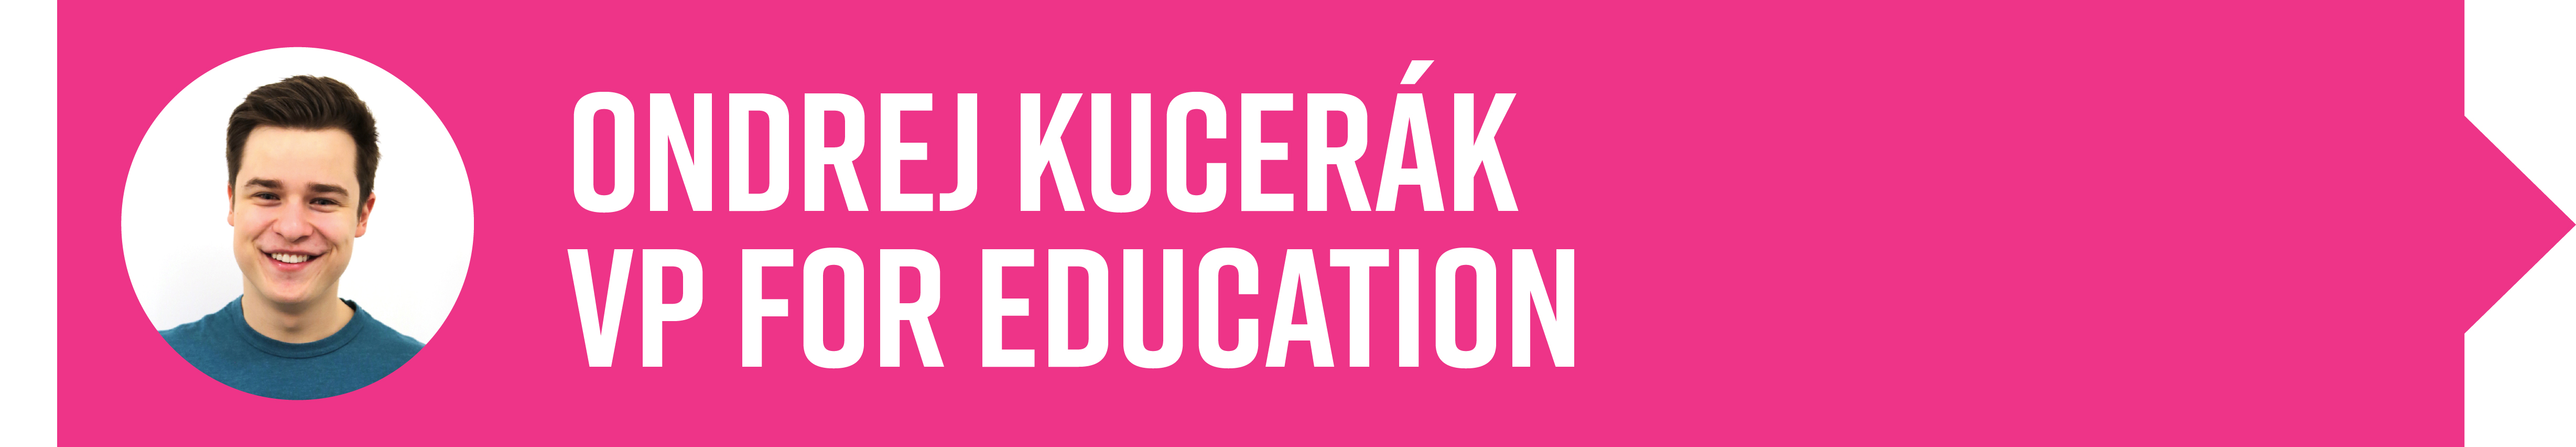 Image contains a photo, name and title for Ondrej Kucerák, Vice President for Education